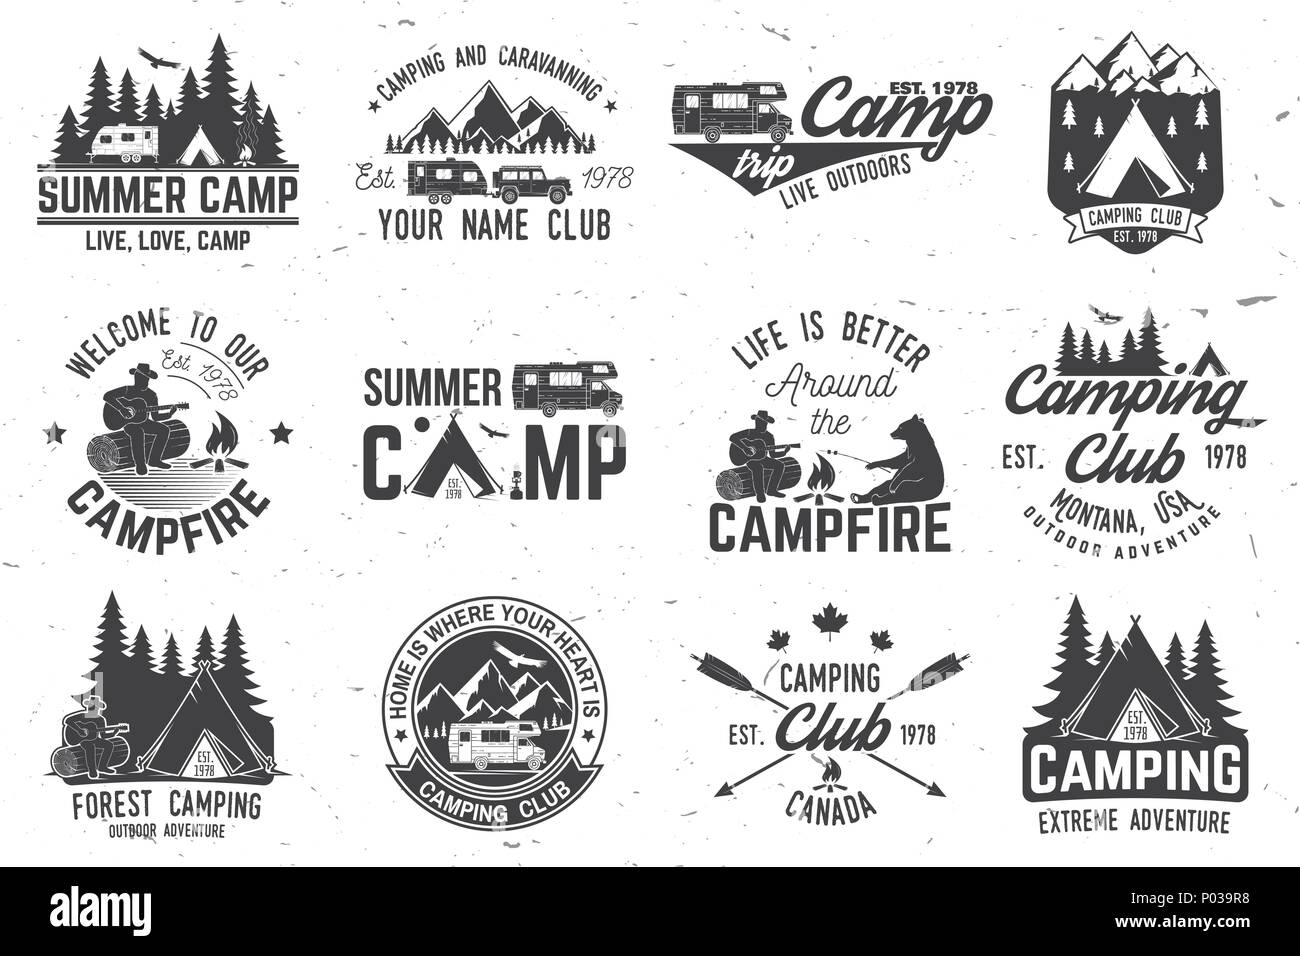 Summer camp. Vector illustration. Concept for shirt or logo, print, stamp or tee. Vintage typography design with rv trailer, camping tent, campfire, b Stock Vector